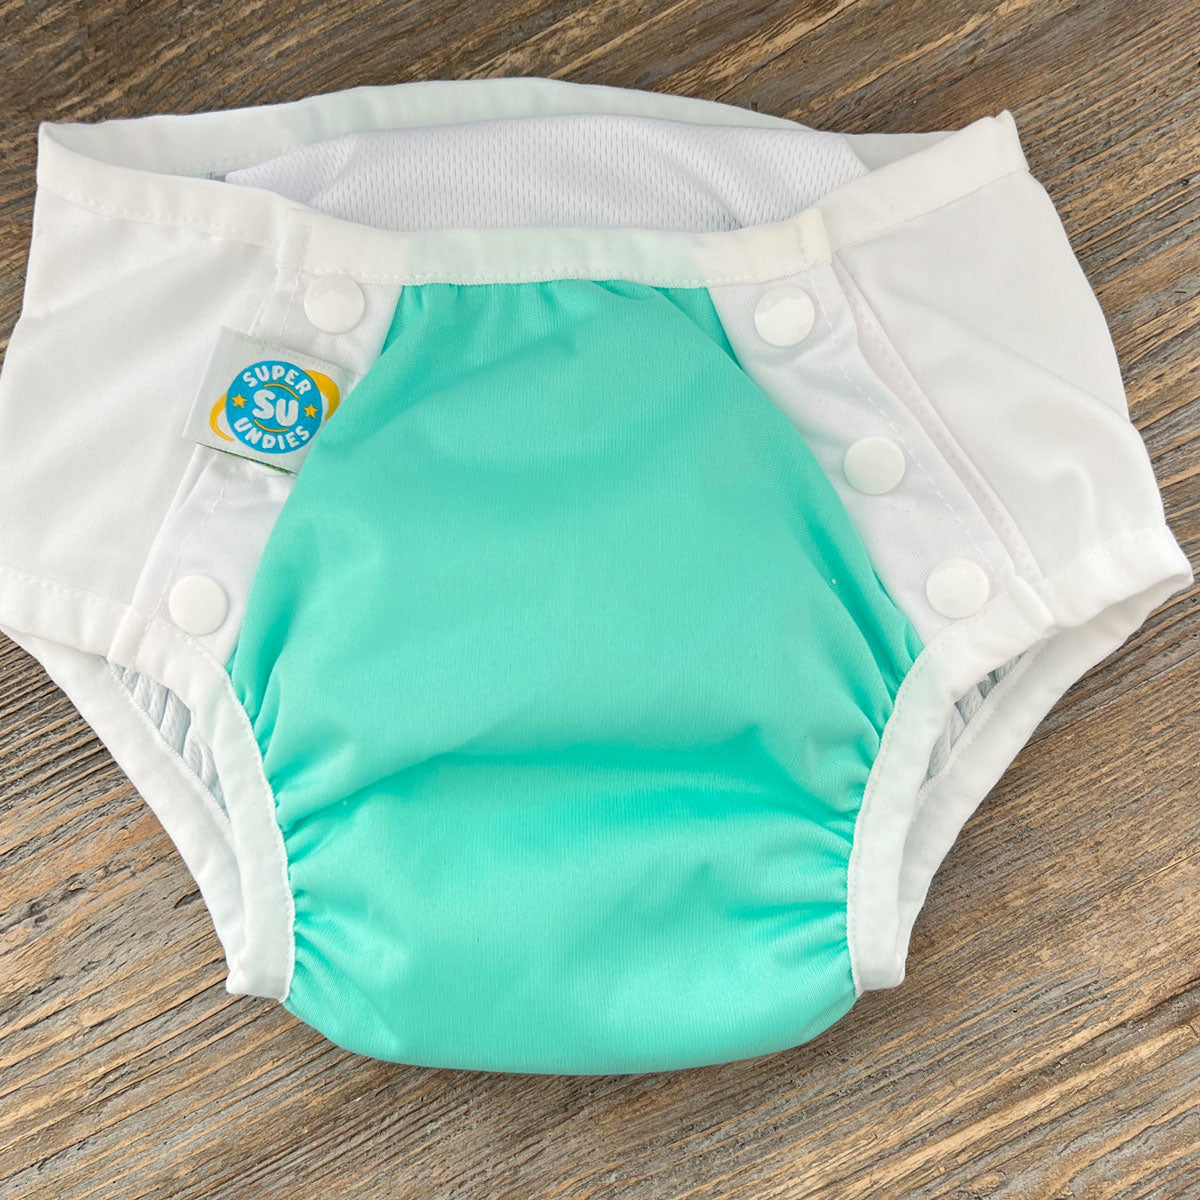  Waterproof Rubber Training Underwear for Toddlers